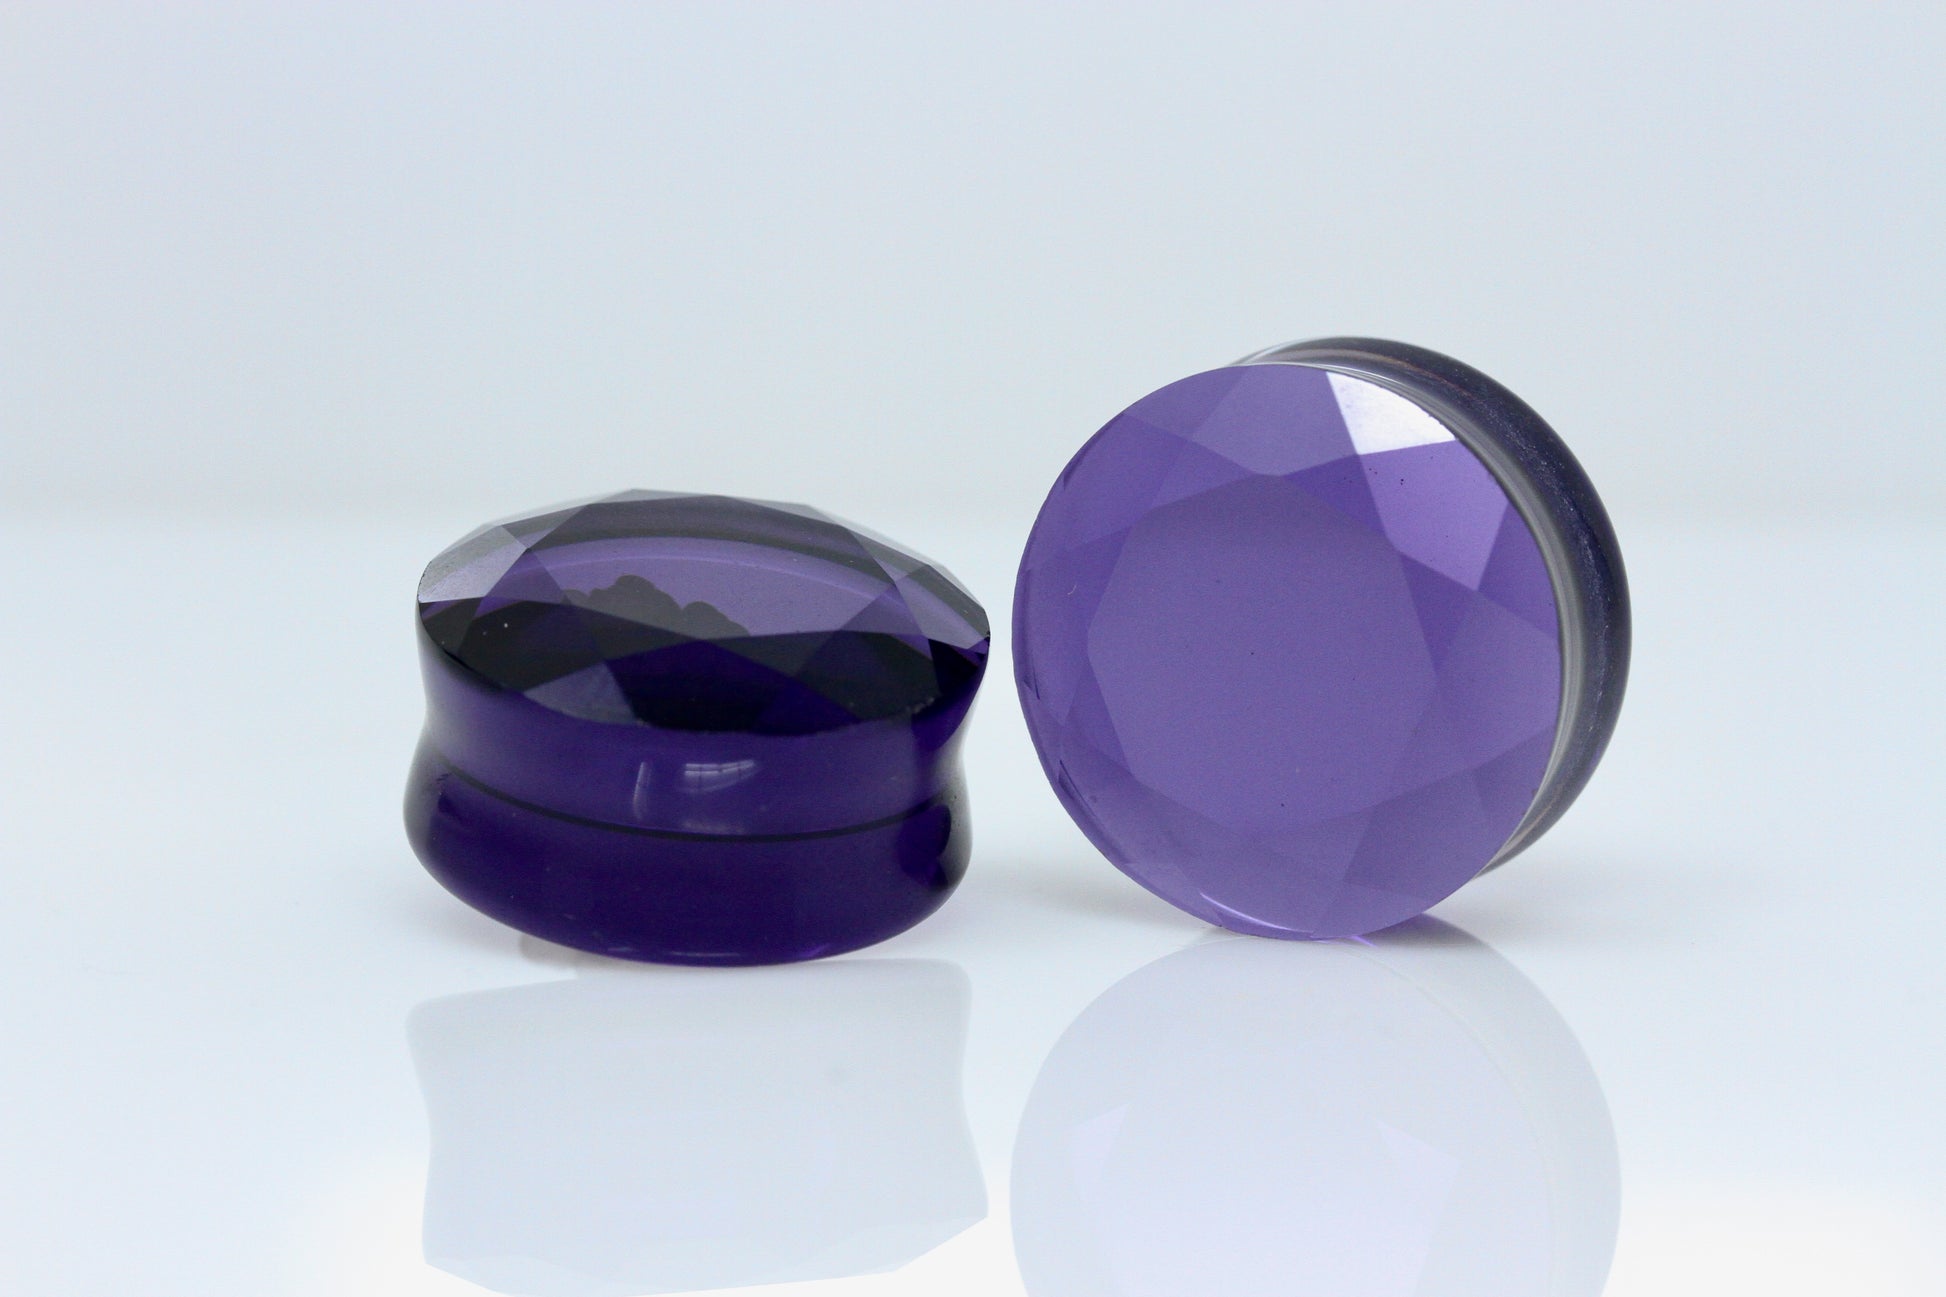 faceted cut glass plugs for stretched ears